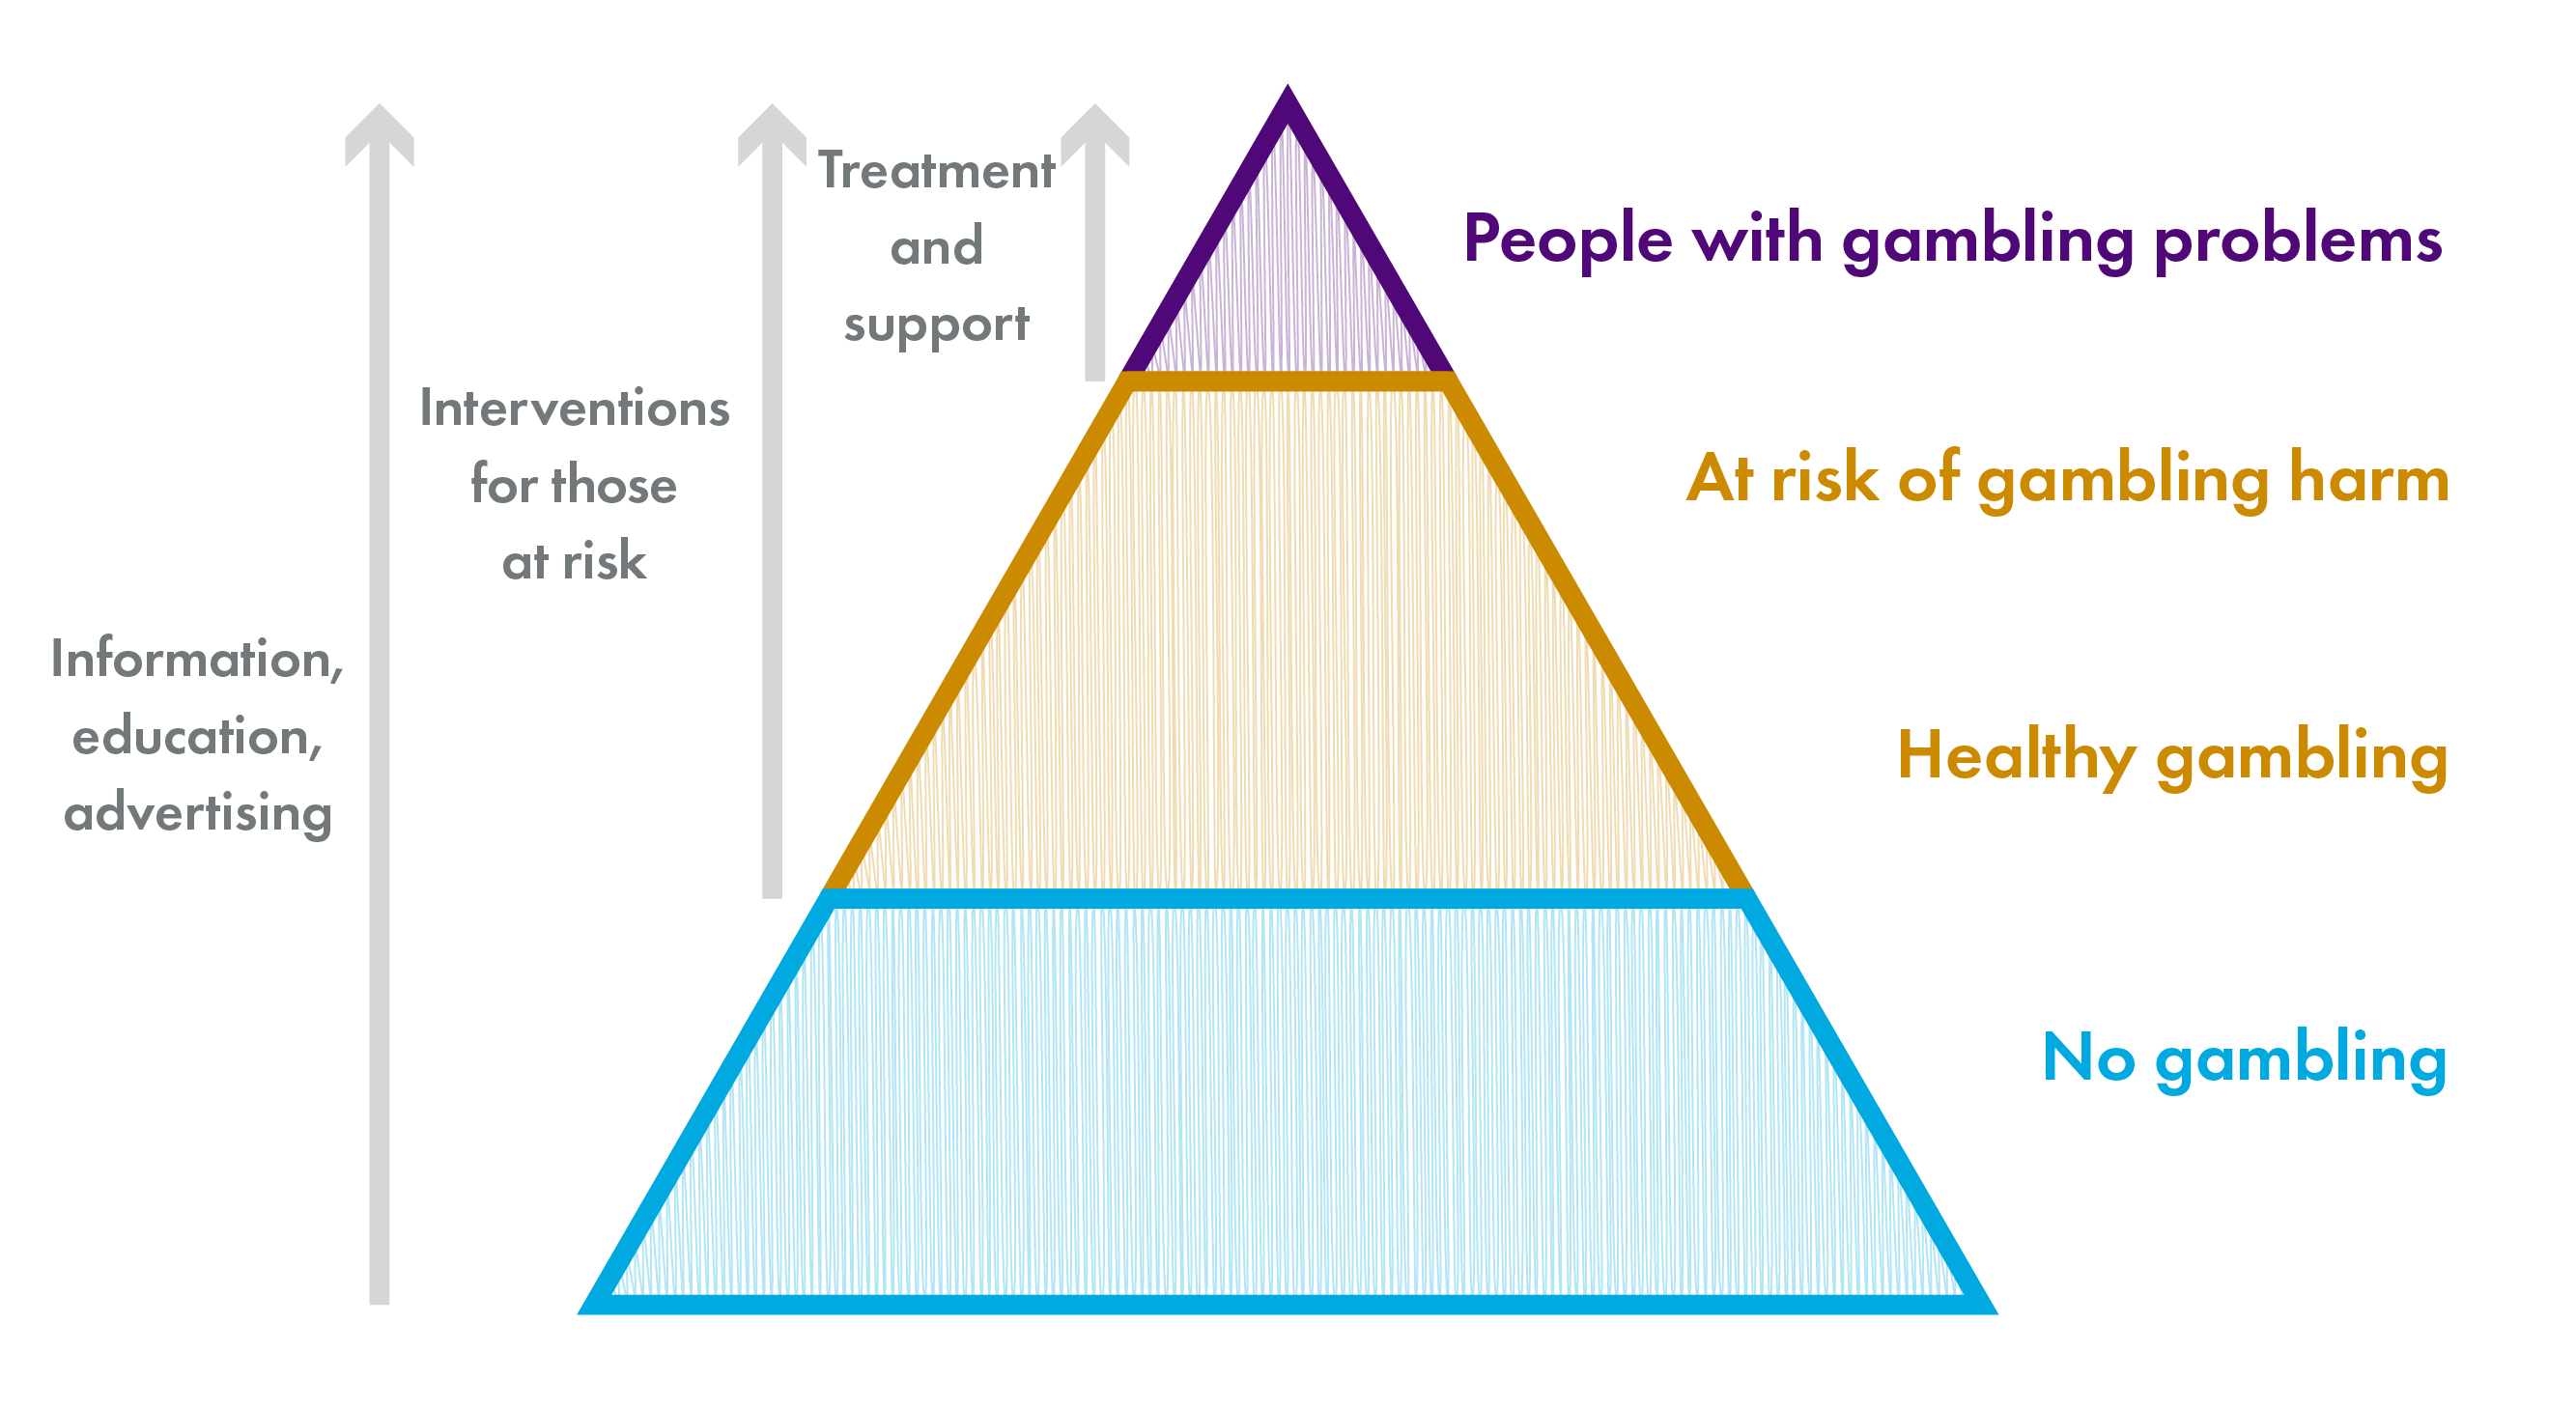 Infographic showing the different interventions (for example, information, advertising regulation, treatment) and the parts of the population that these can target (for example, information campaigns can target the whole population, whereas treatment and support is targeted at individuals who are harmed by gambling).